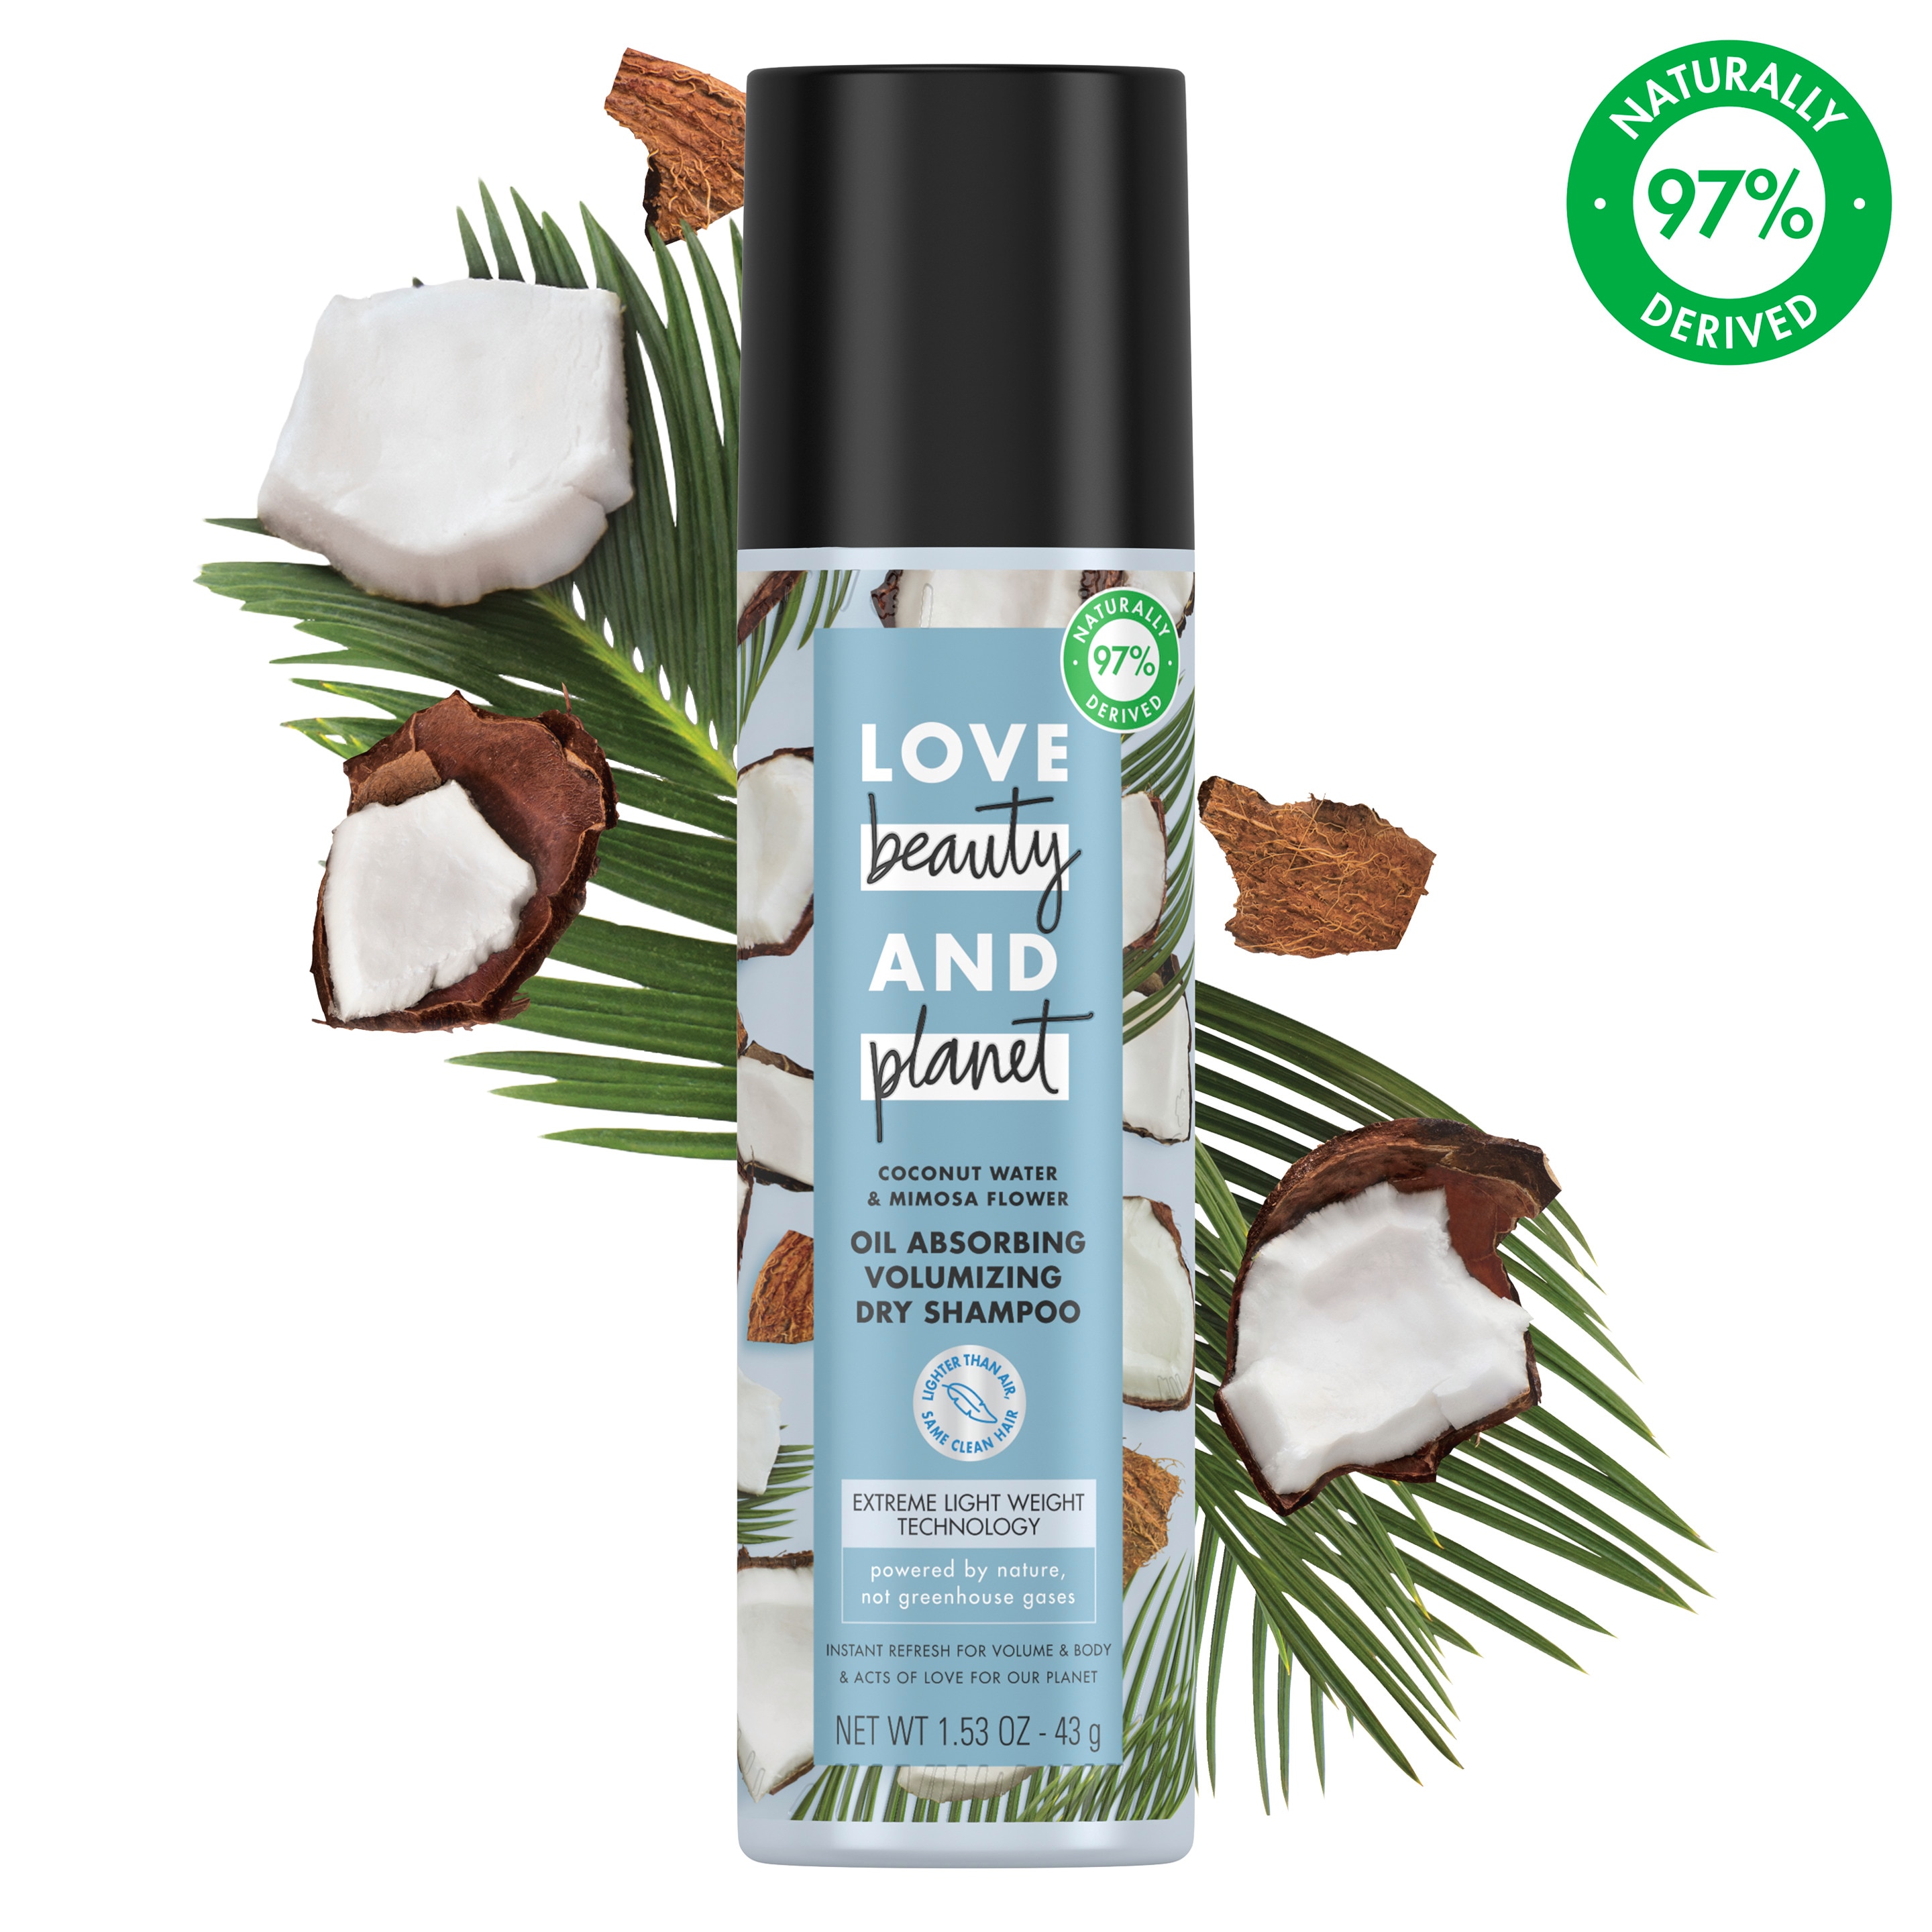 Coconut Water and Mimosa Flower Dry Shampoo